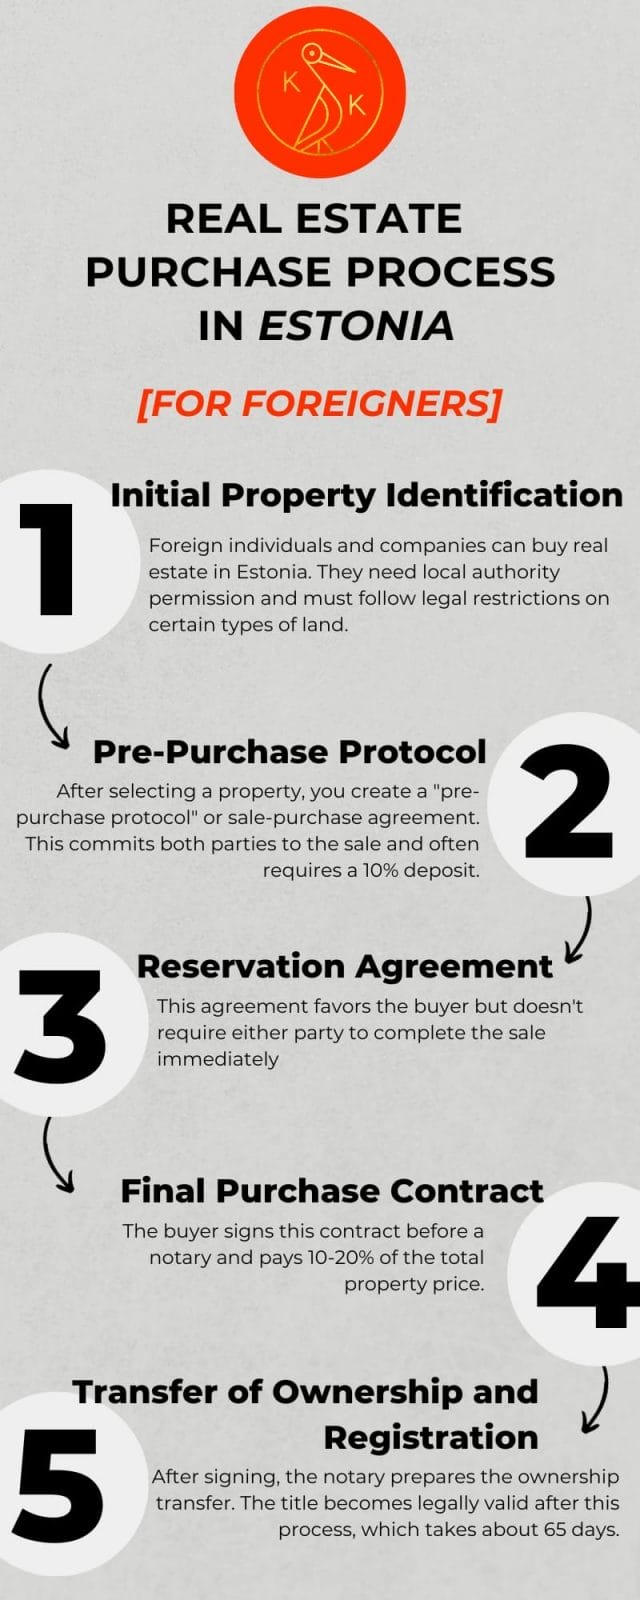 Quick overview of Real estate purchase process in Estonia